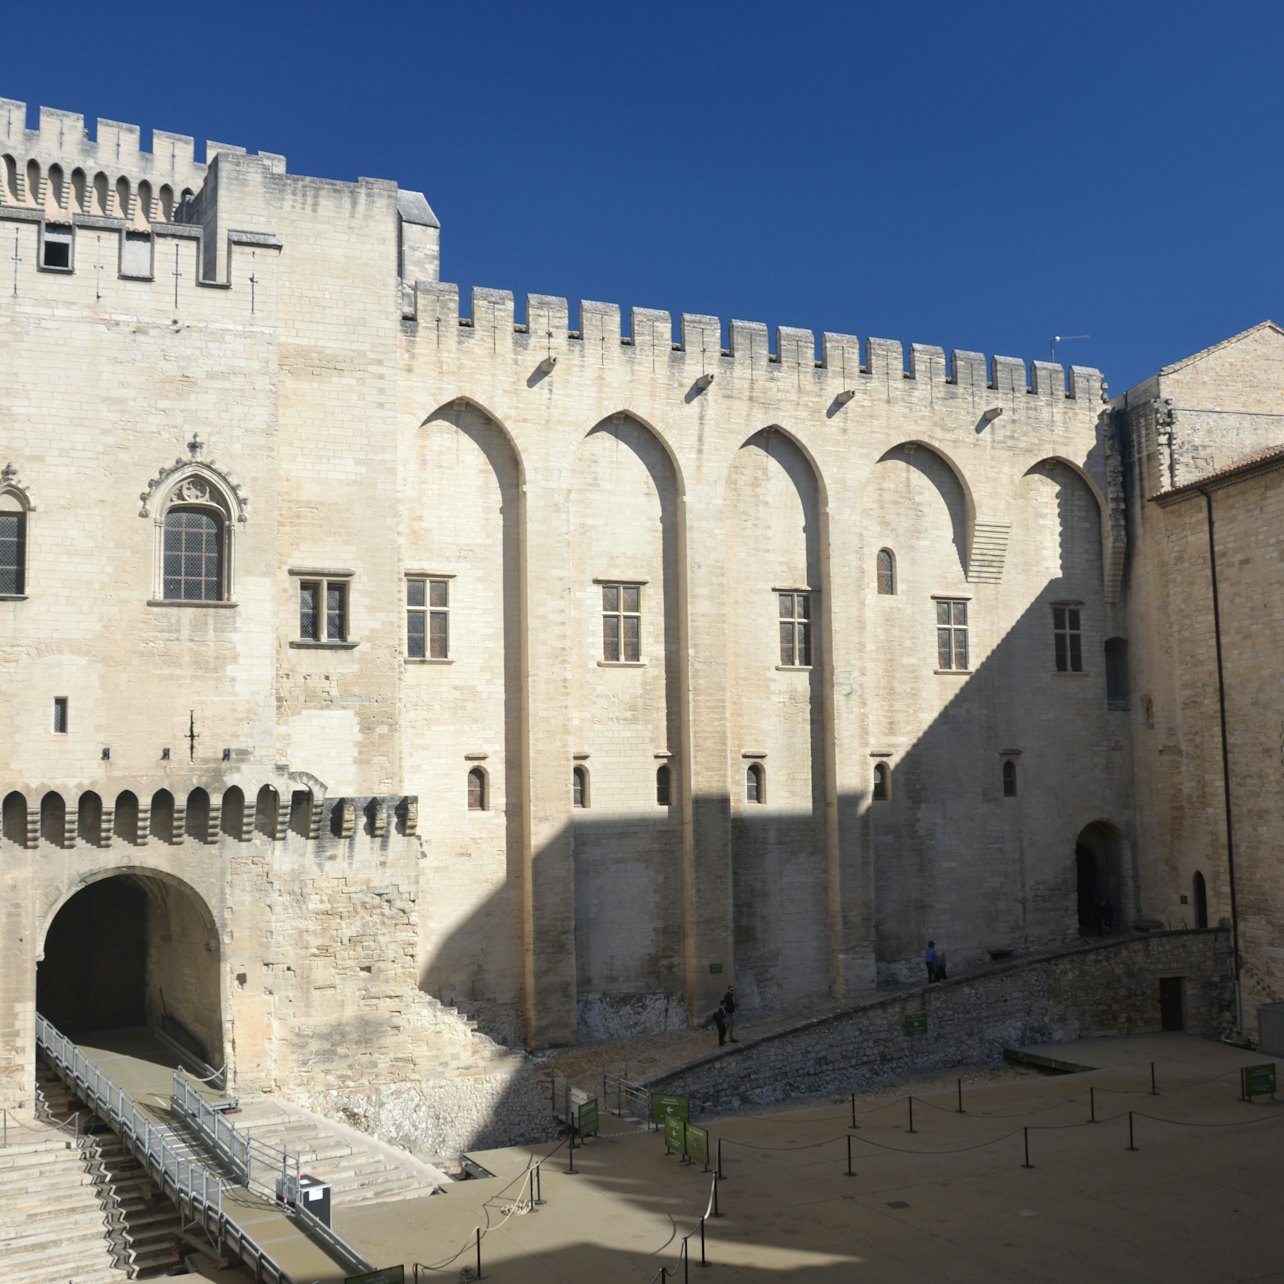 Palais des Papes - Accommodations in Avignon